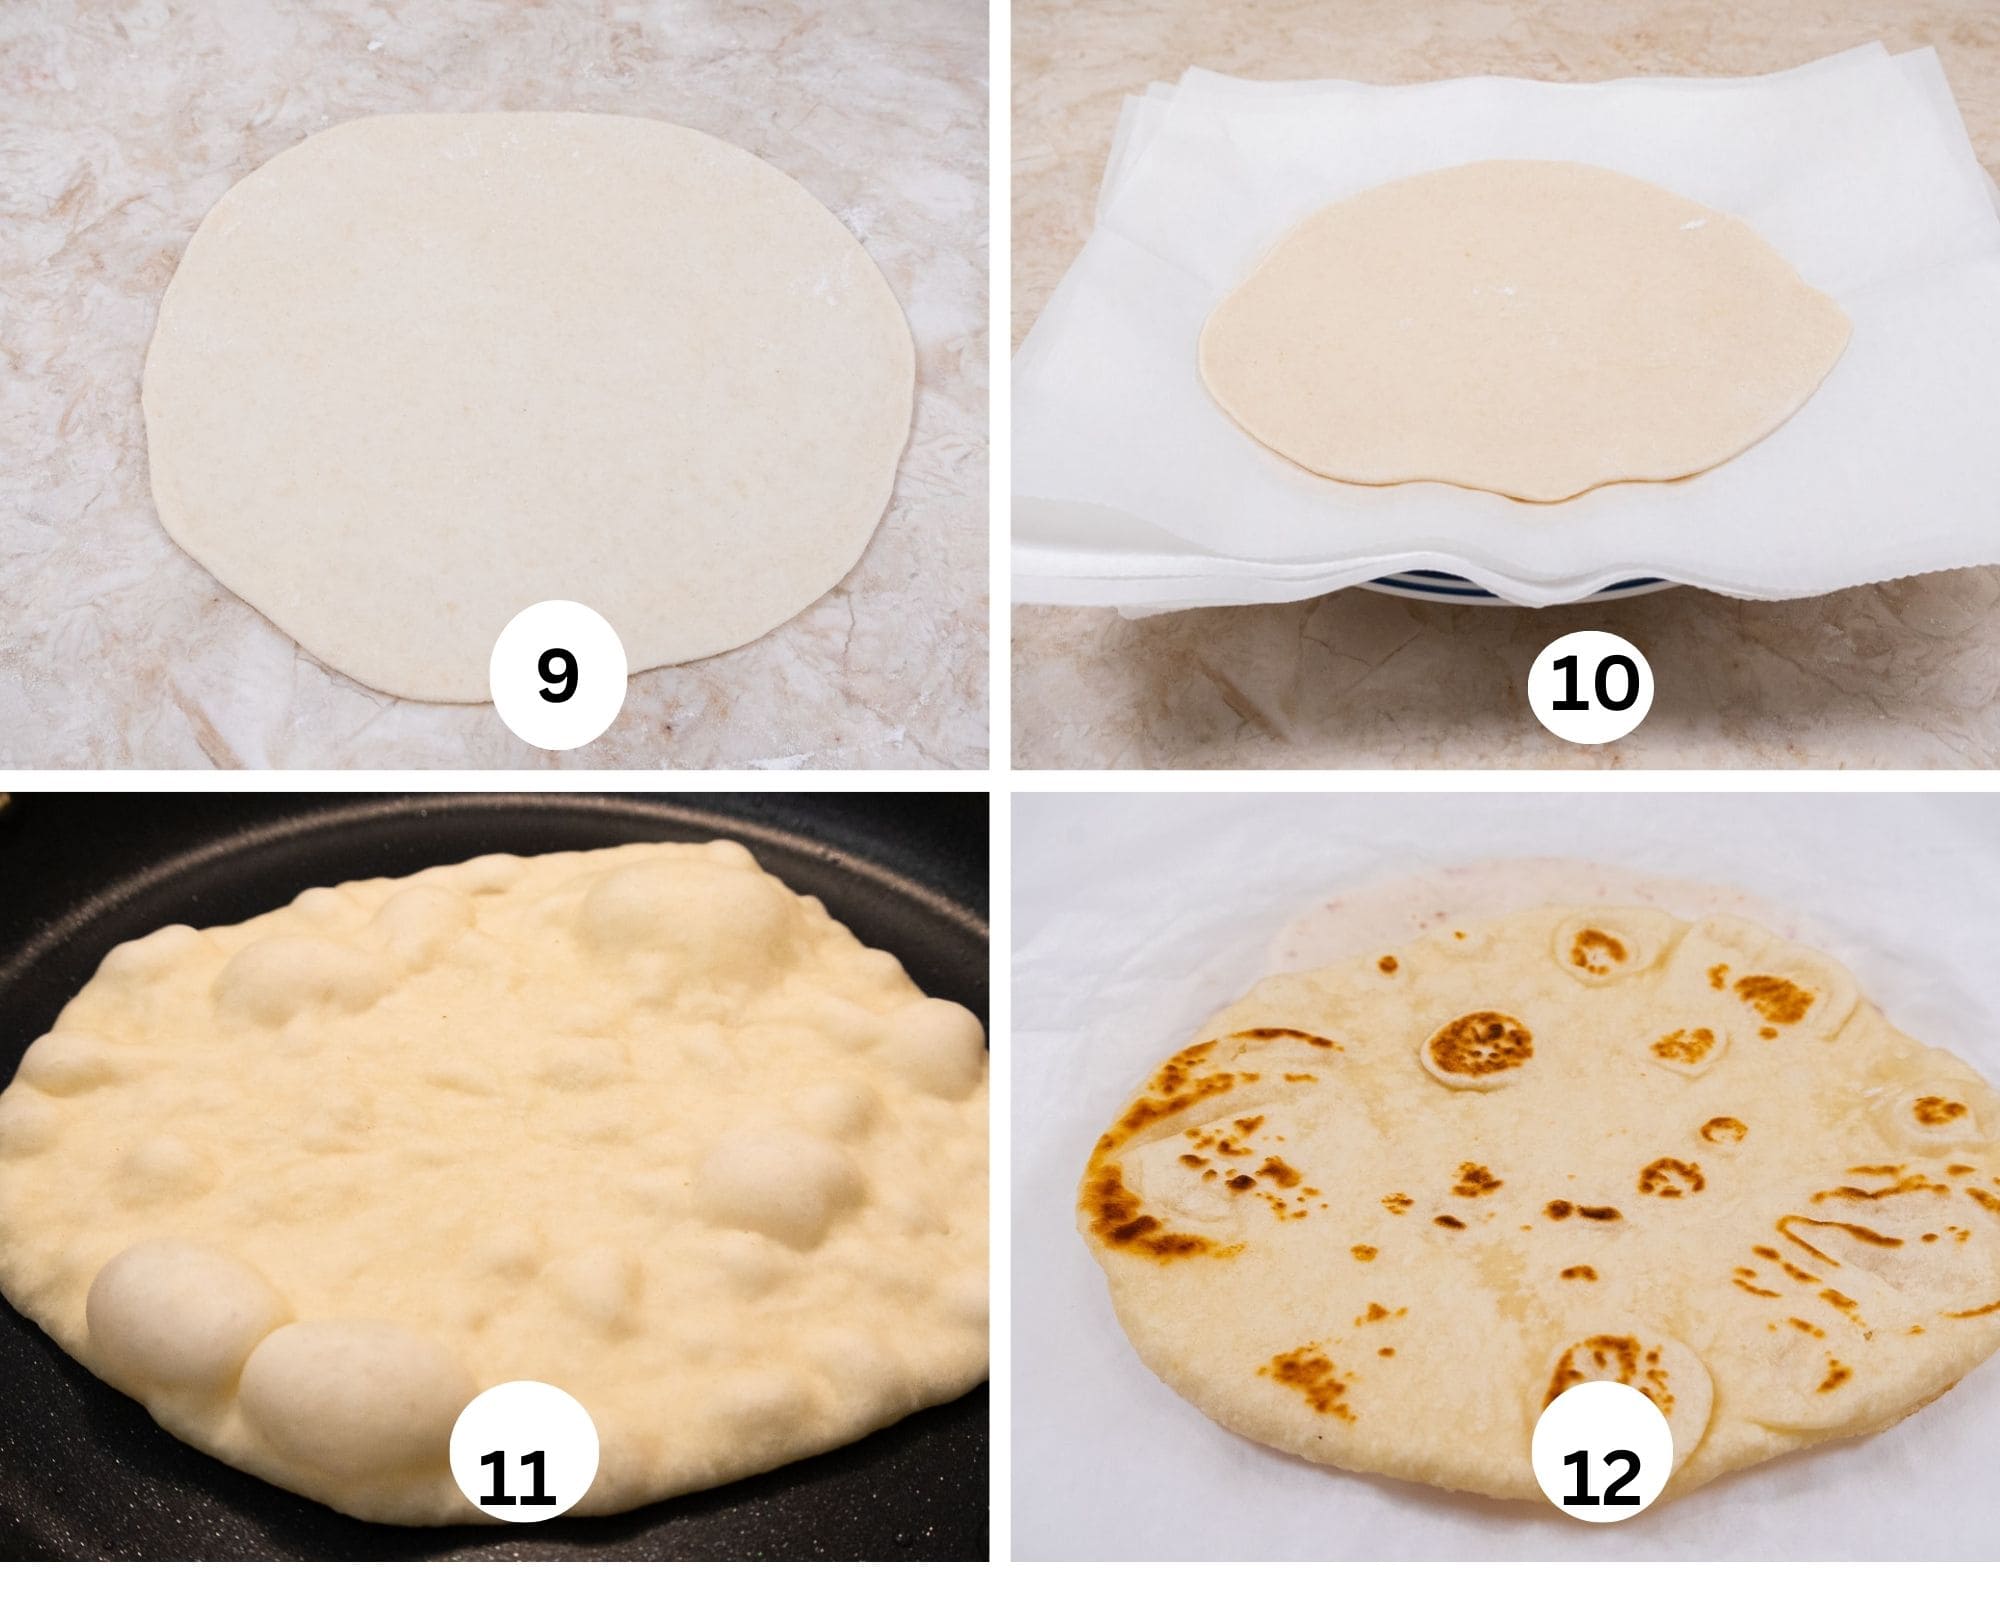 The last collage shows the flattened ball rolled into an 8" circle, all of them are placed on a plate with paper between them, one in the frying pan with lots of bubbles on top and the last picture is   flatbread fried on the second side. 